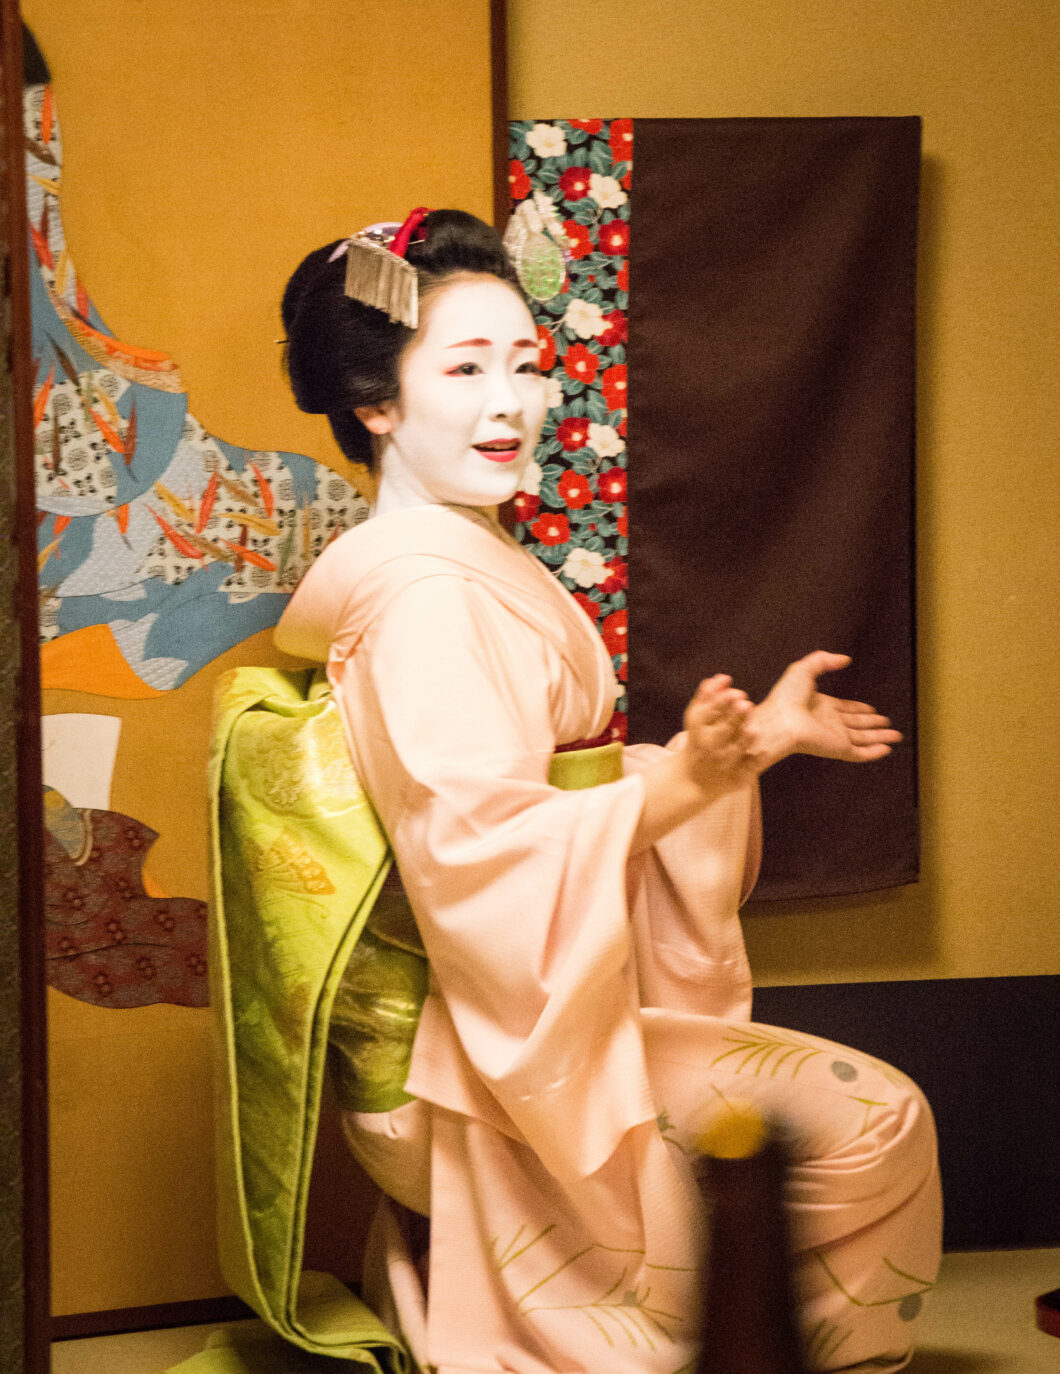 A young Maiko kneels on one knee, clapping along with music during a dinner performance. She is smiling and looking at the guests.